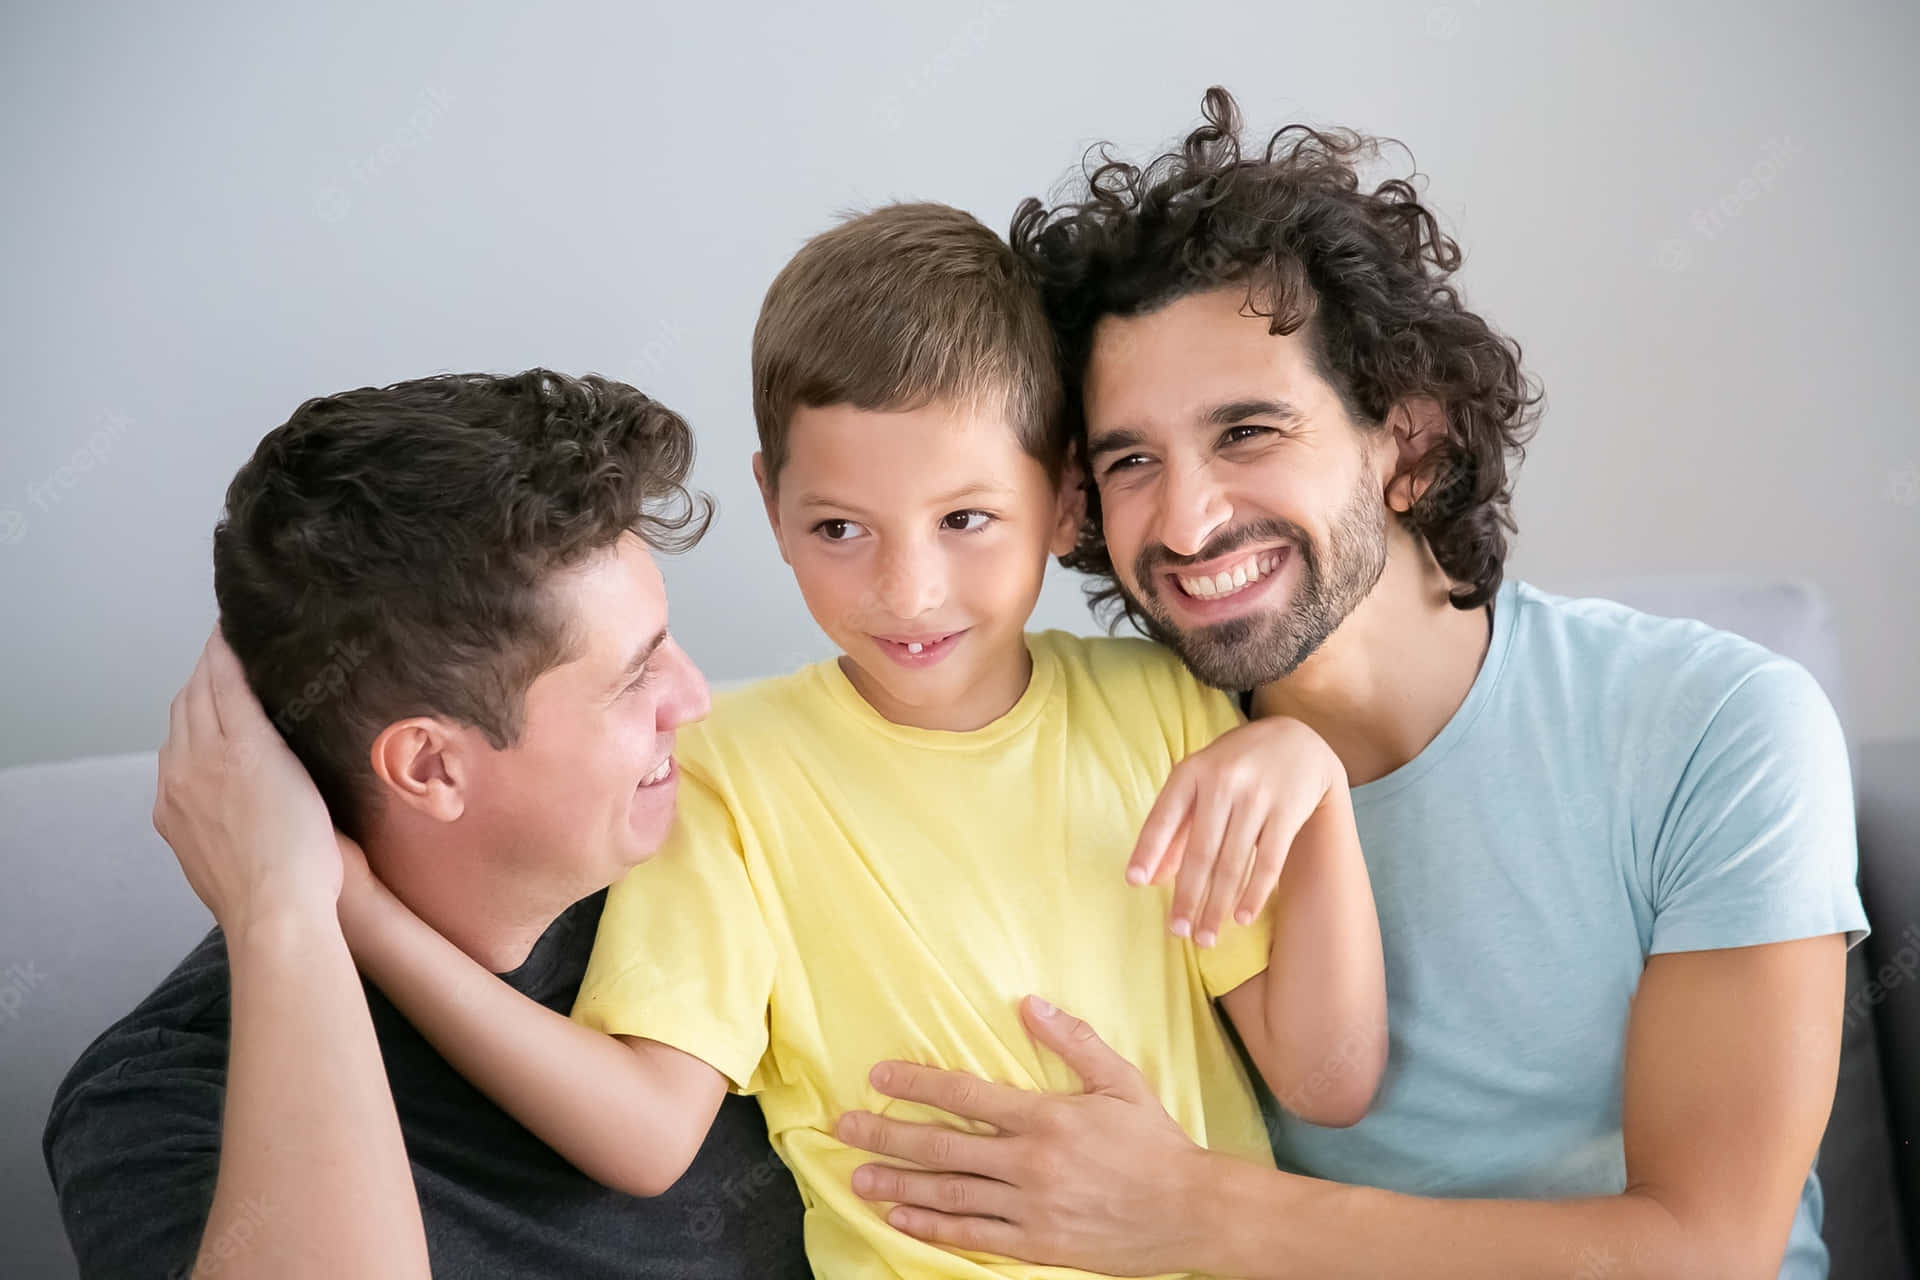 Smiling Gay Boys With A Kid Wallpaper